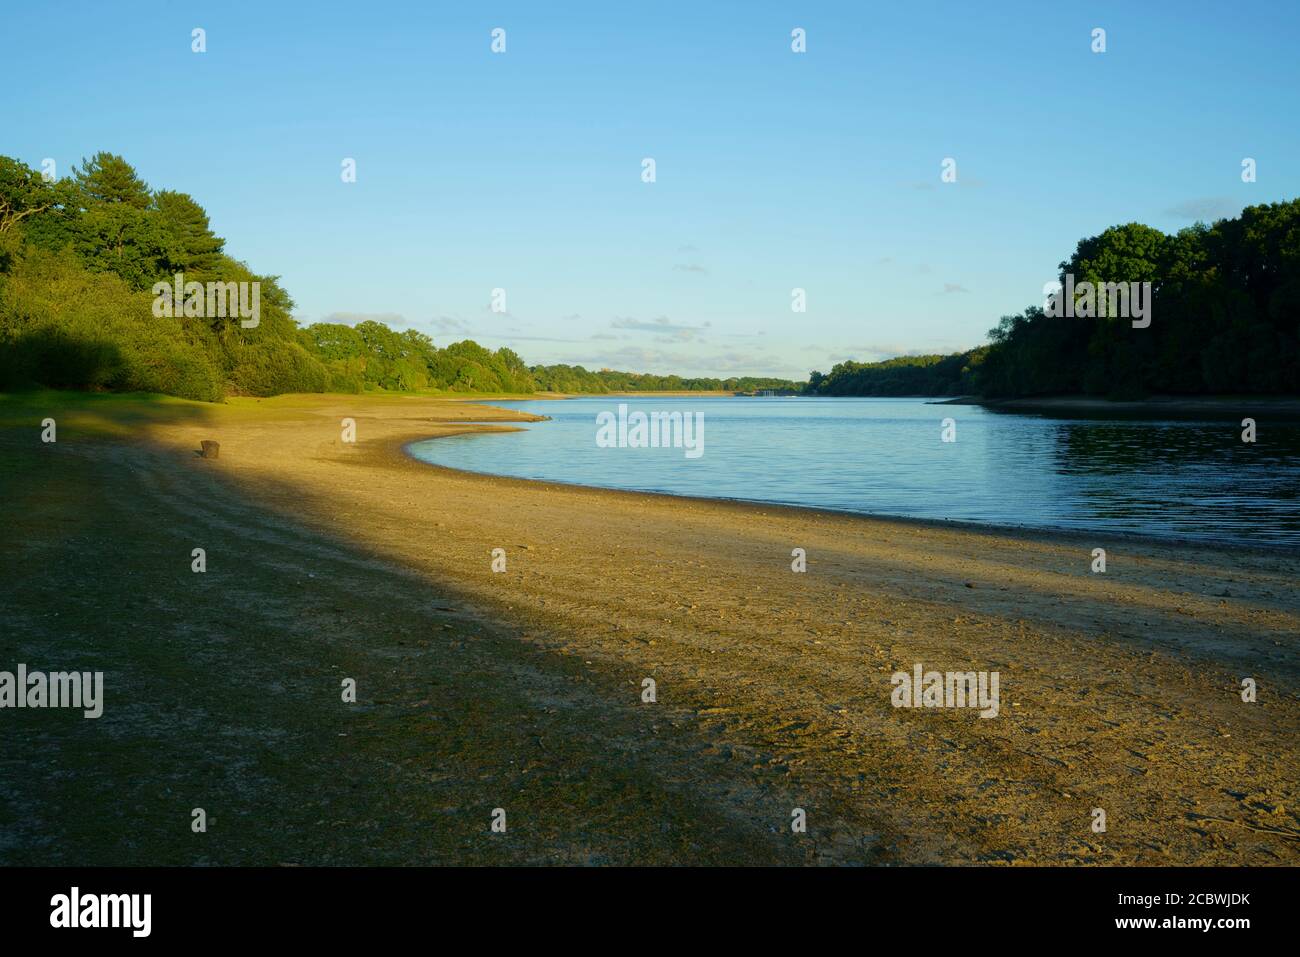 August 2020 low water level at Ardingly reservoir west sussex UK. Stock Photo